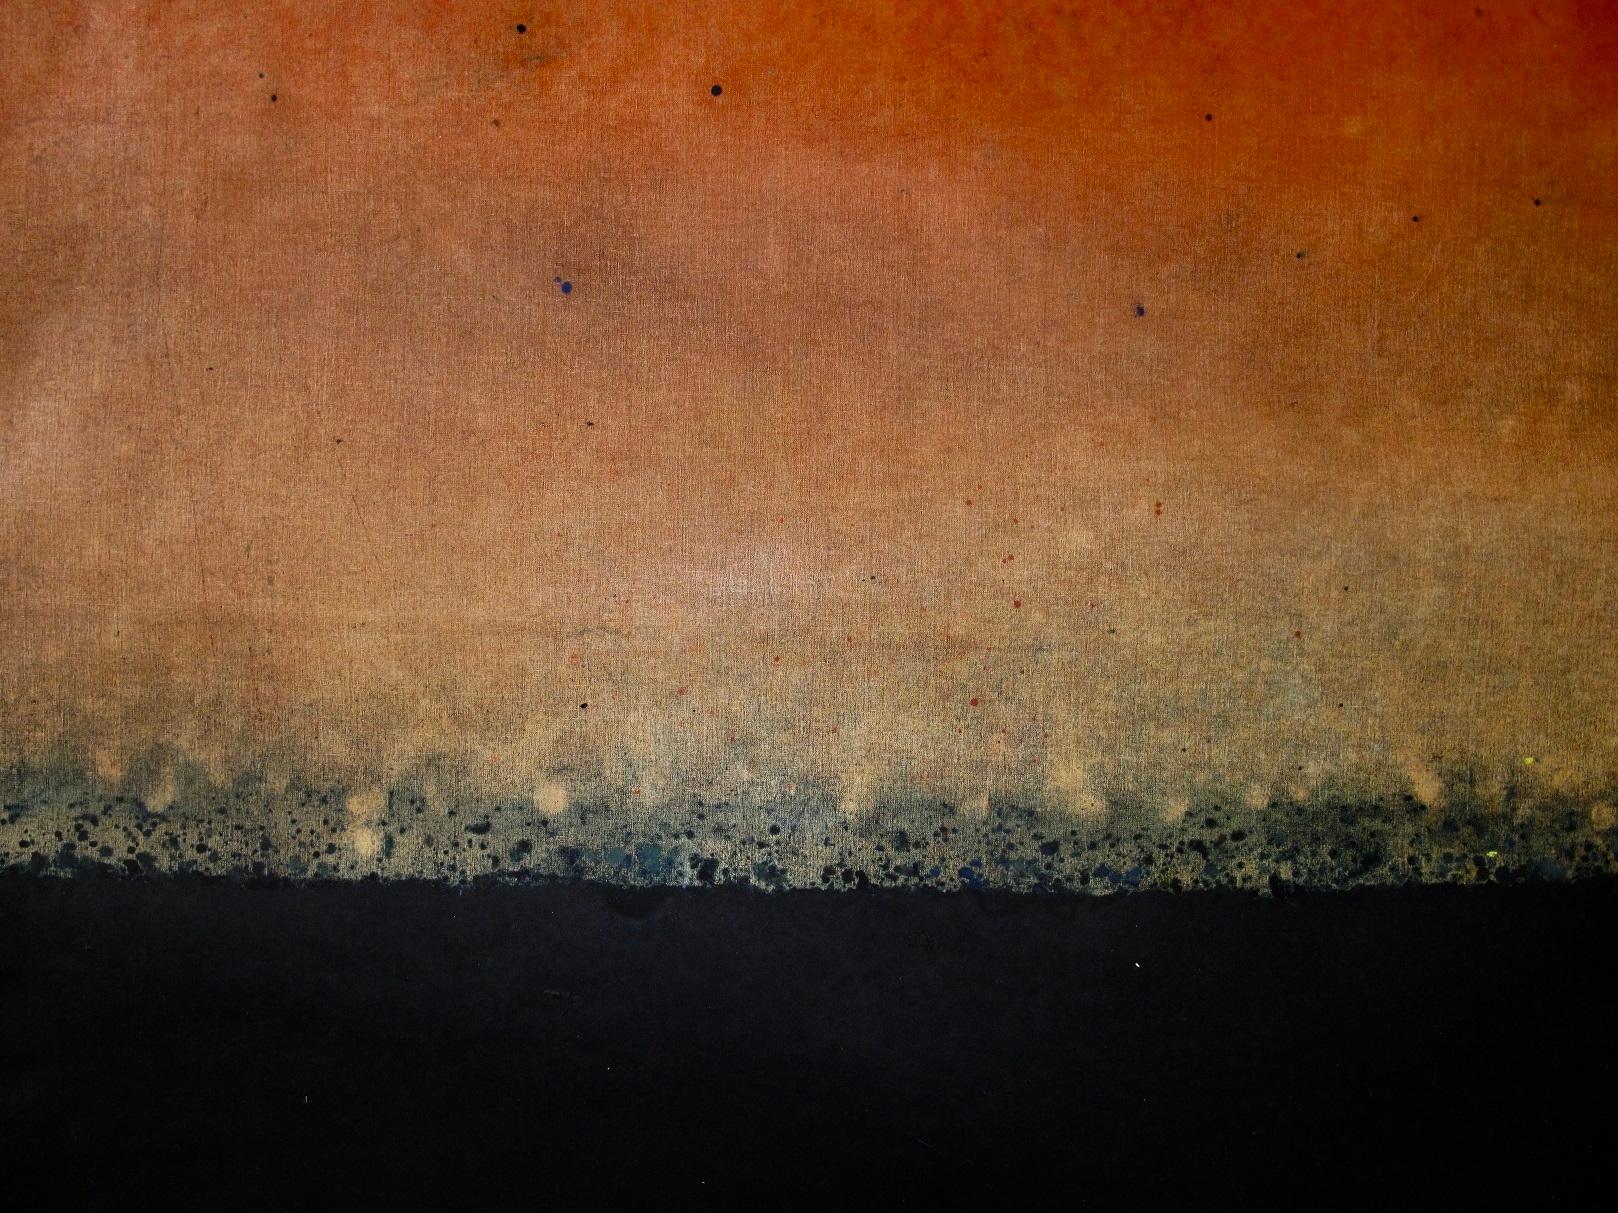 Untitled I by Ferle - Large abstract painting, black and orange, dark - Abstract Painting by Elvire Ferle